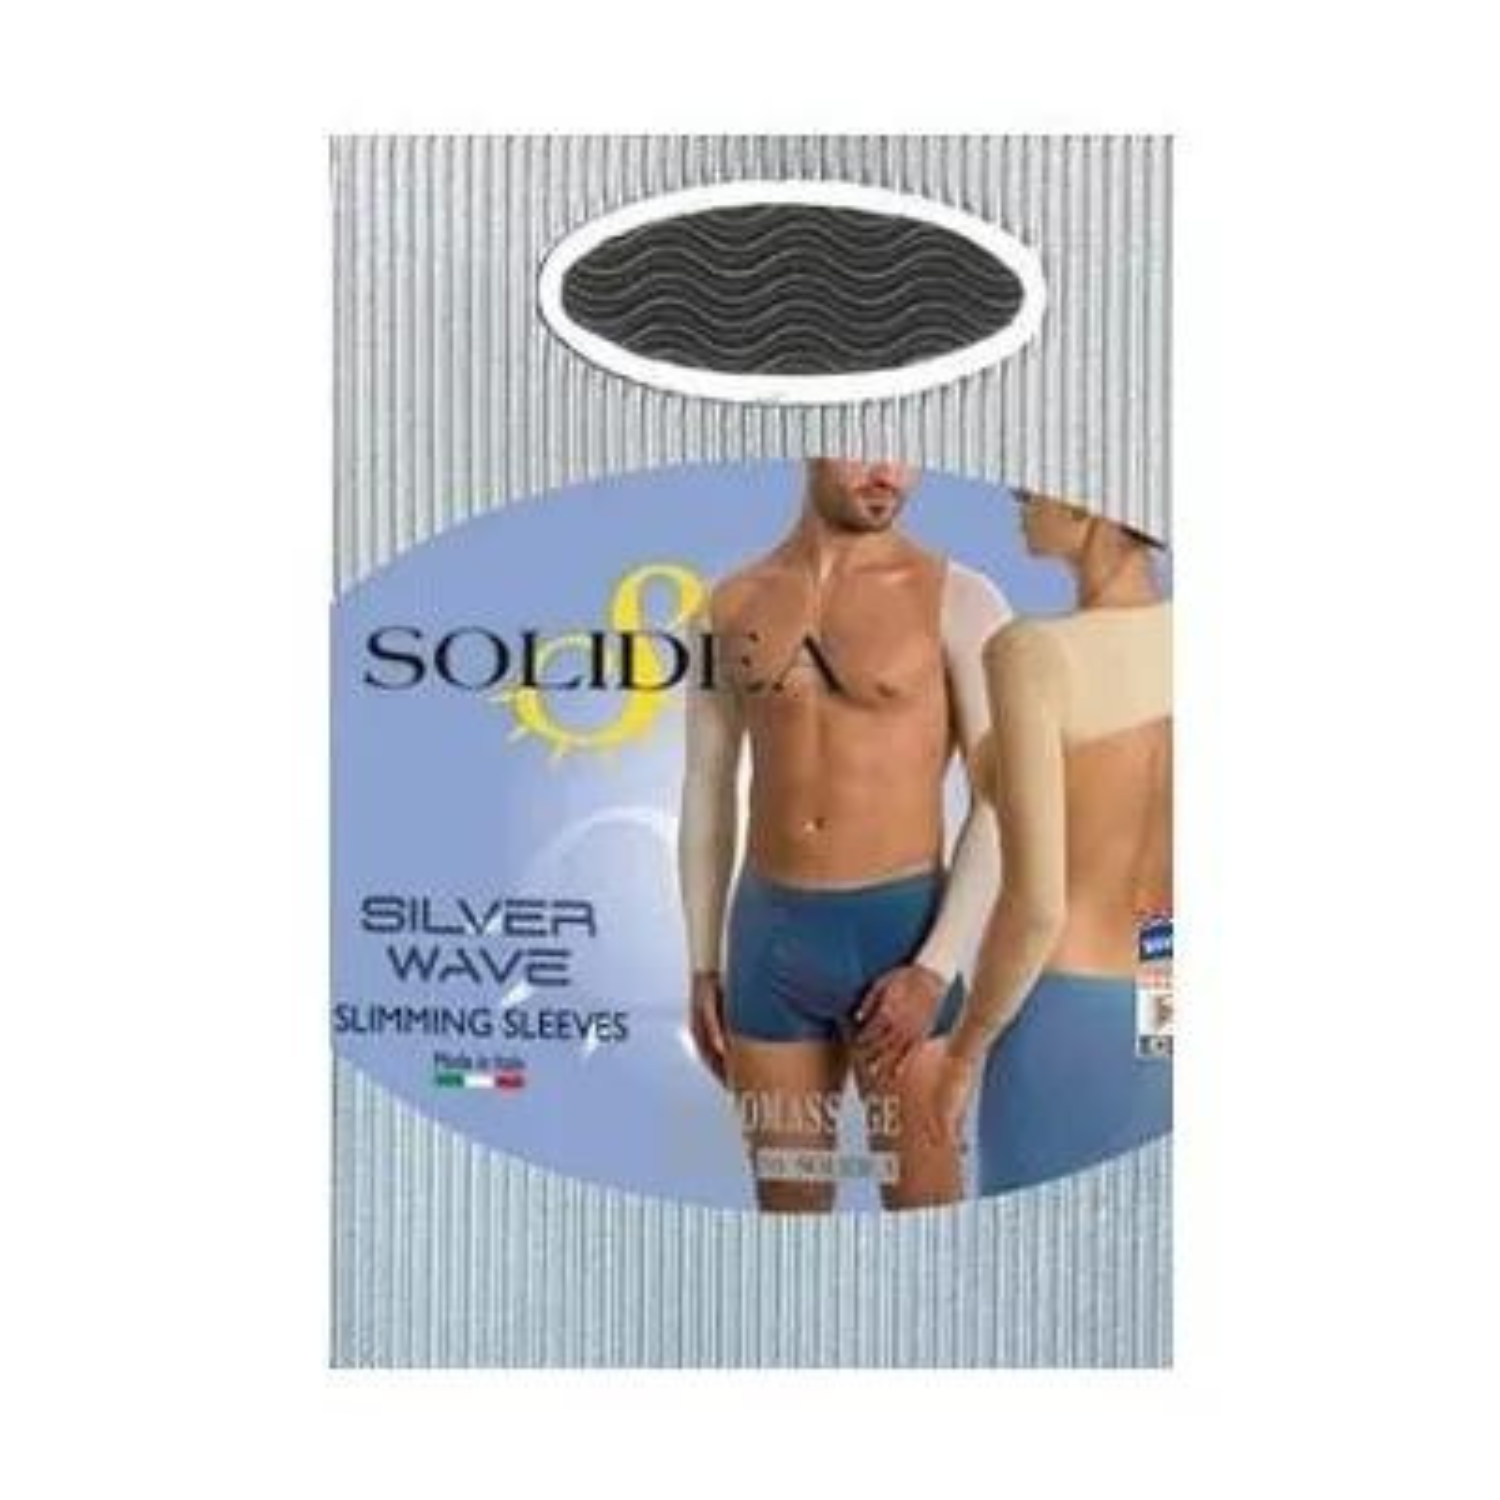 Solidea Silver Wave Slimming Sleeves Sleeves 3L Champagne